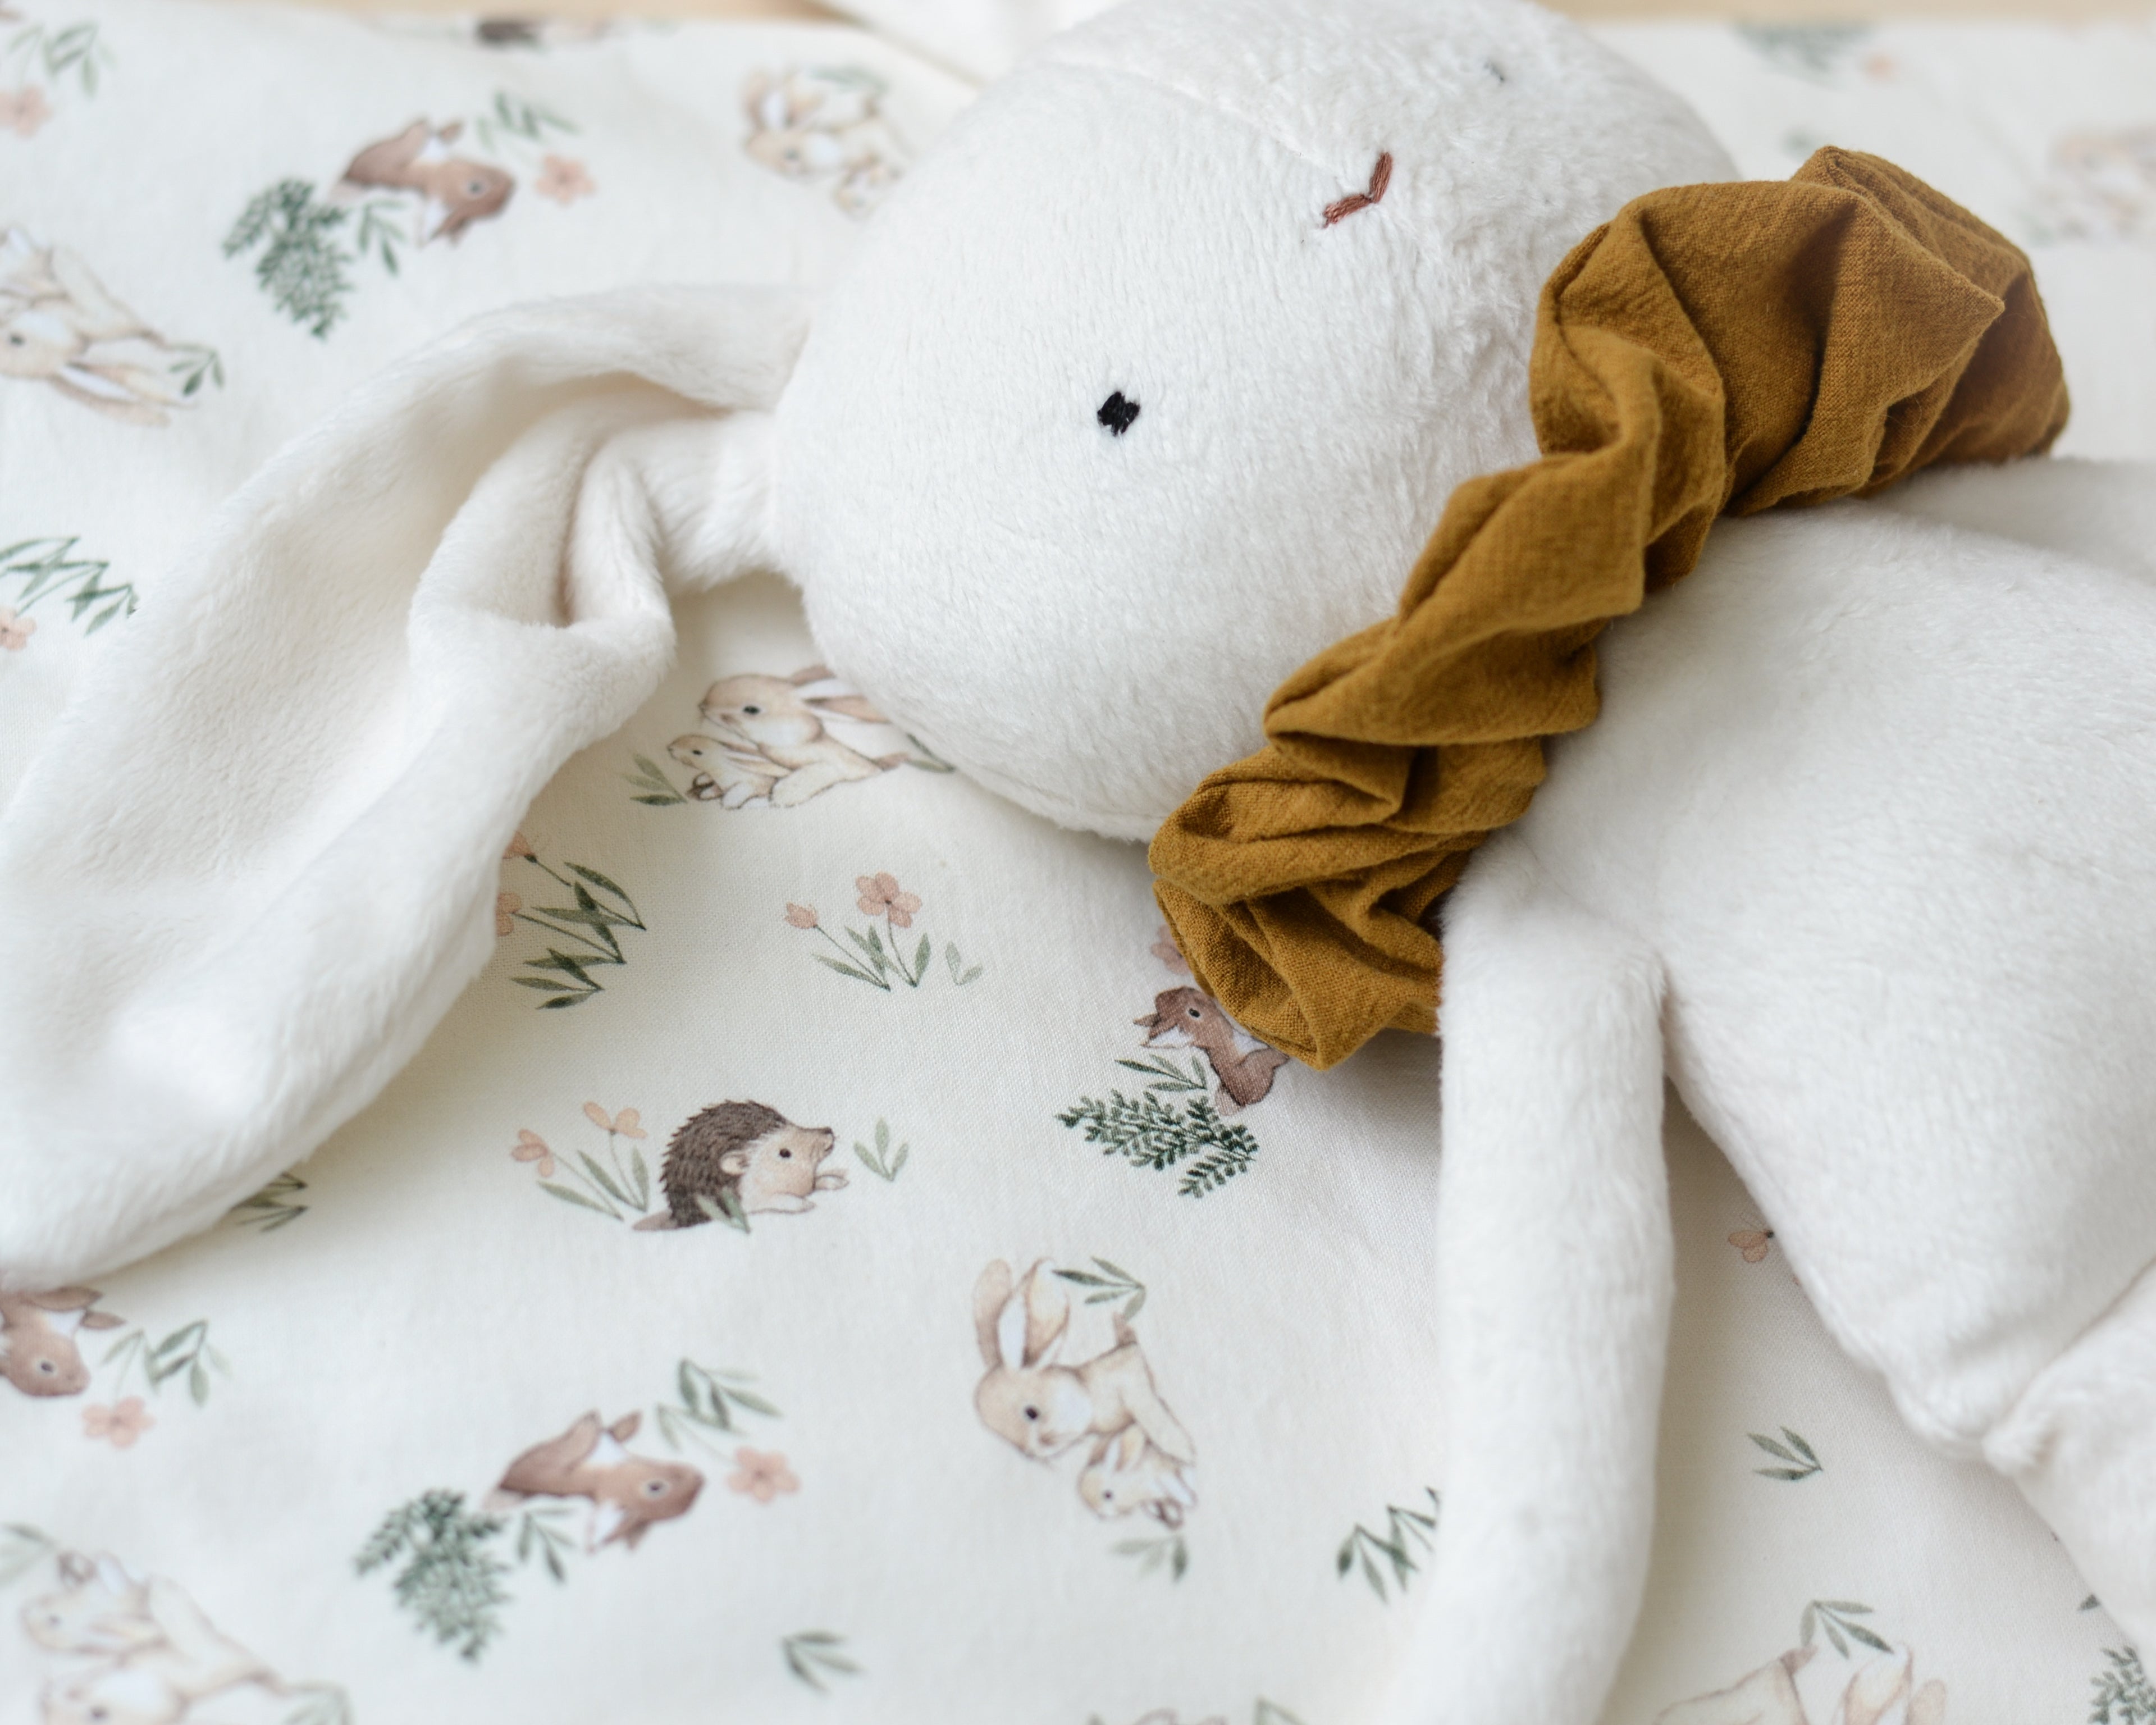 Bunny Plush and Blanket set White Forest